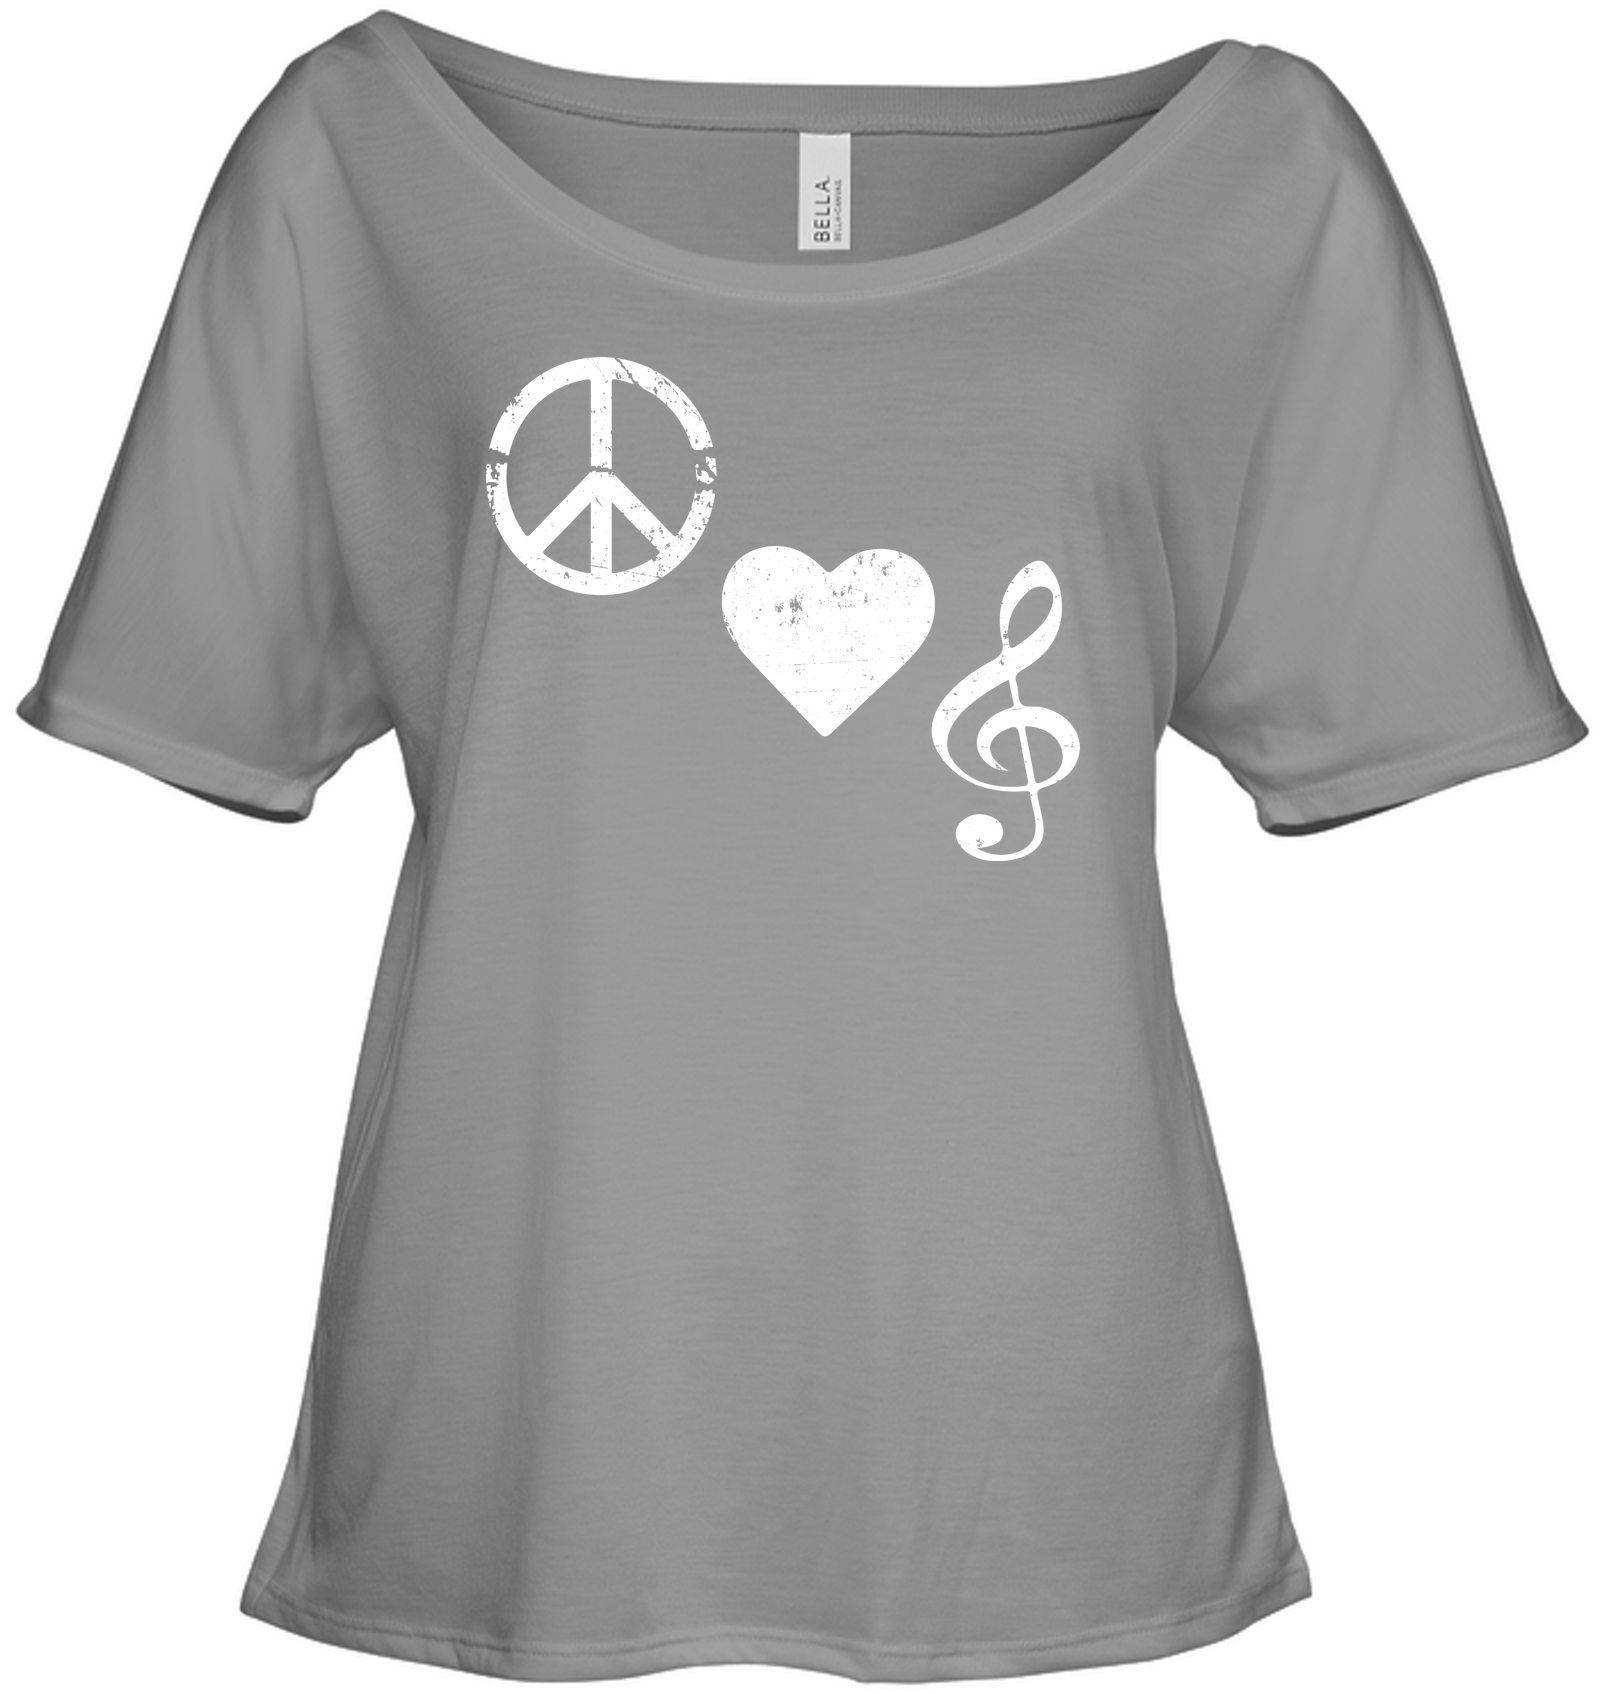 Peace Heart Musical Clef - Bella + Canvas Women's Slouchy Tee